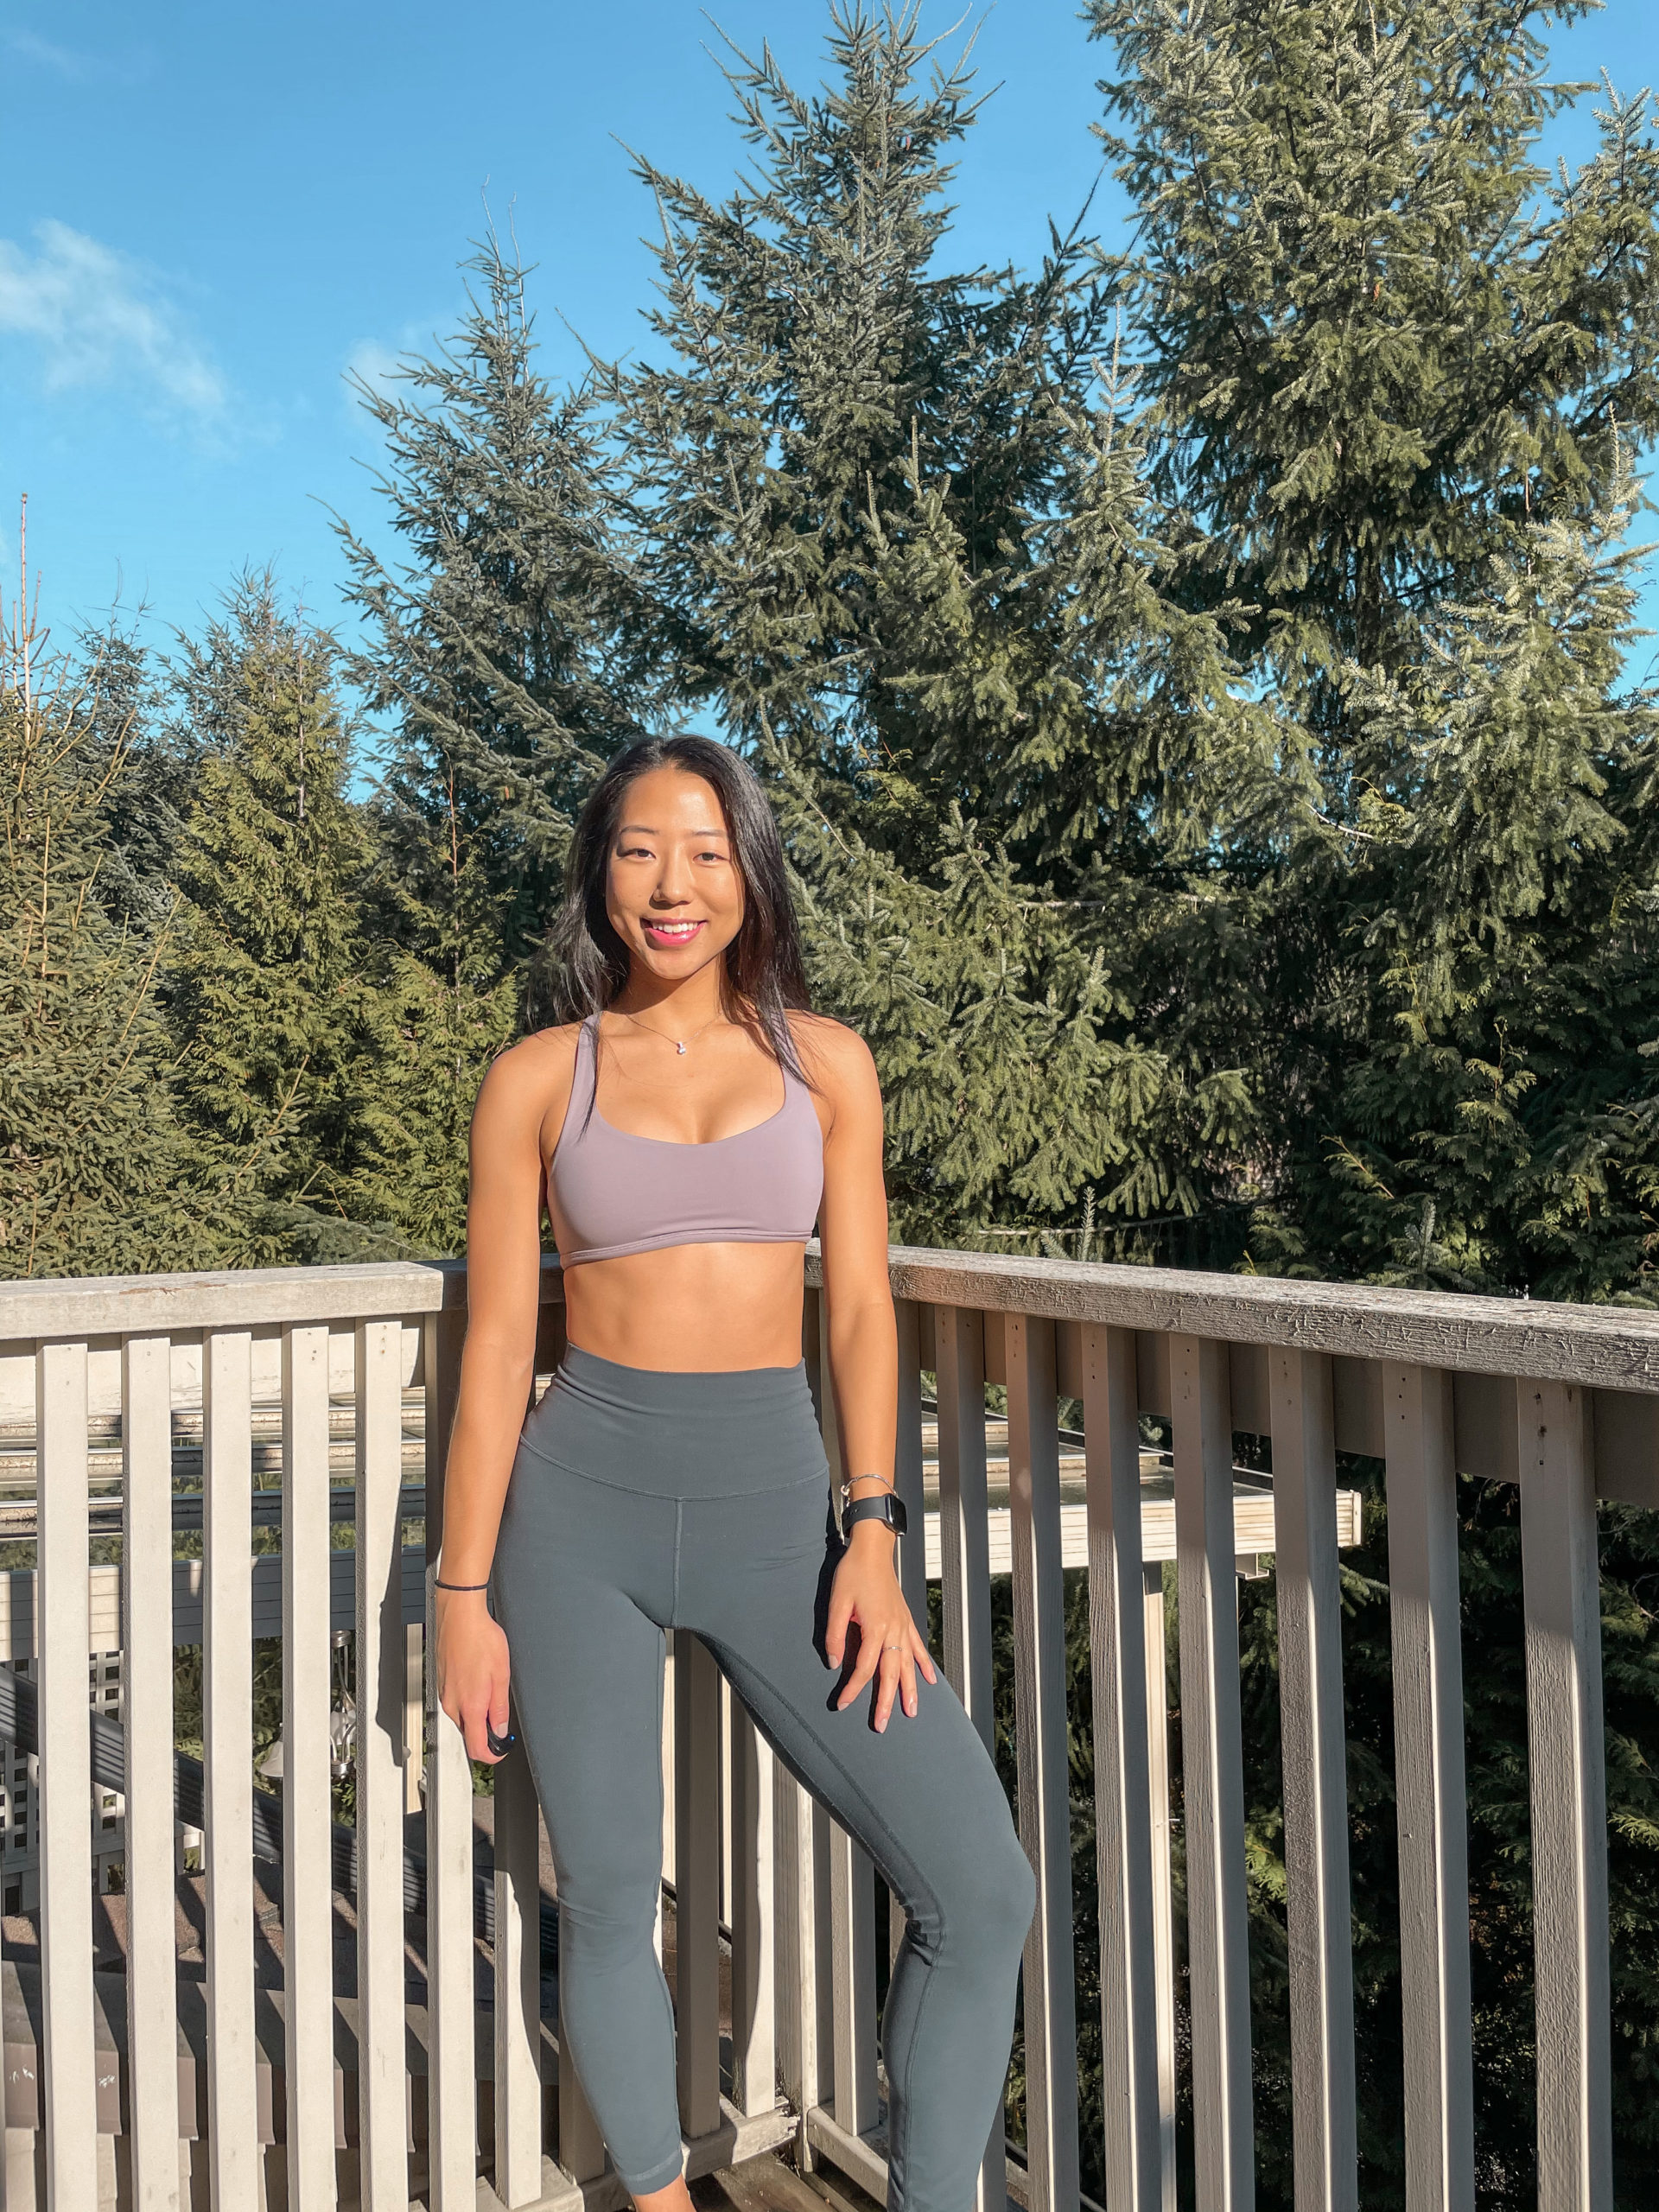 TRAINING ABS BUT NOT SEEING ANY RESULTS? – Julia Oh